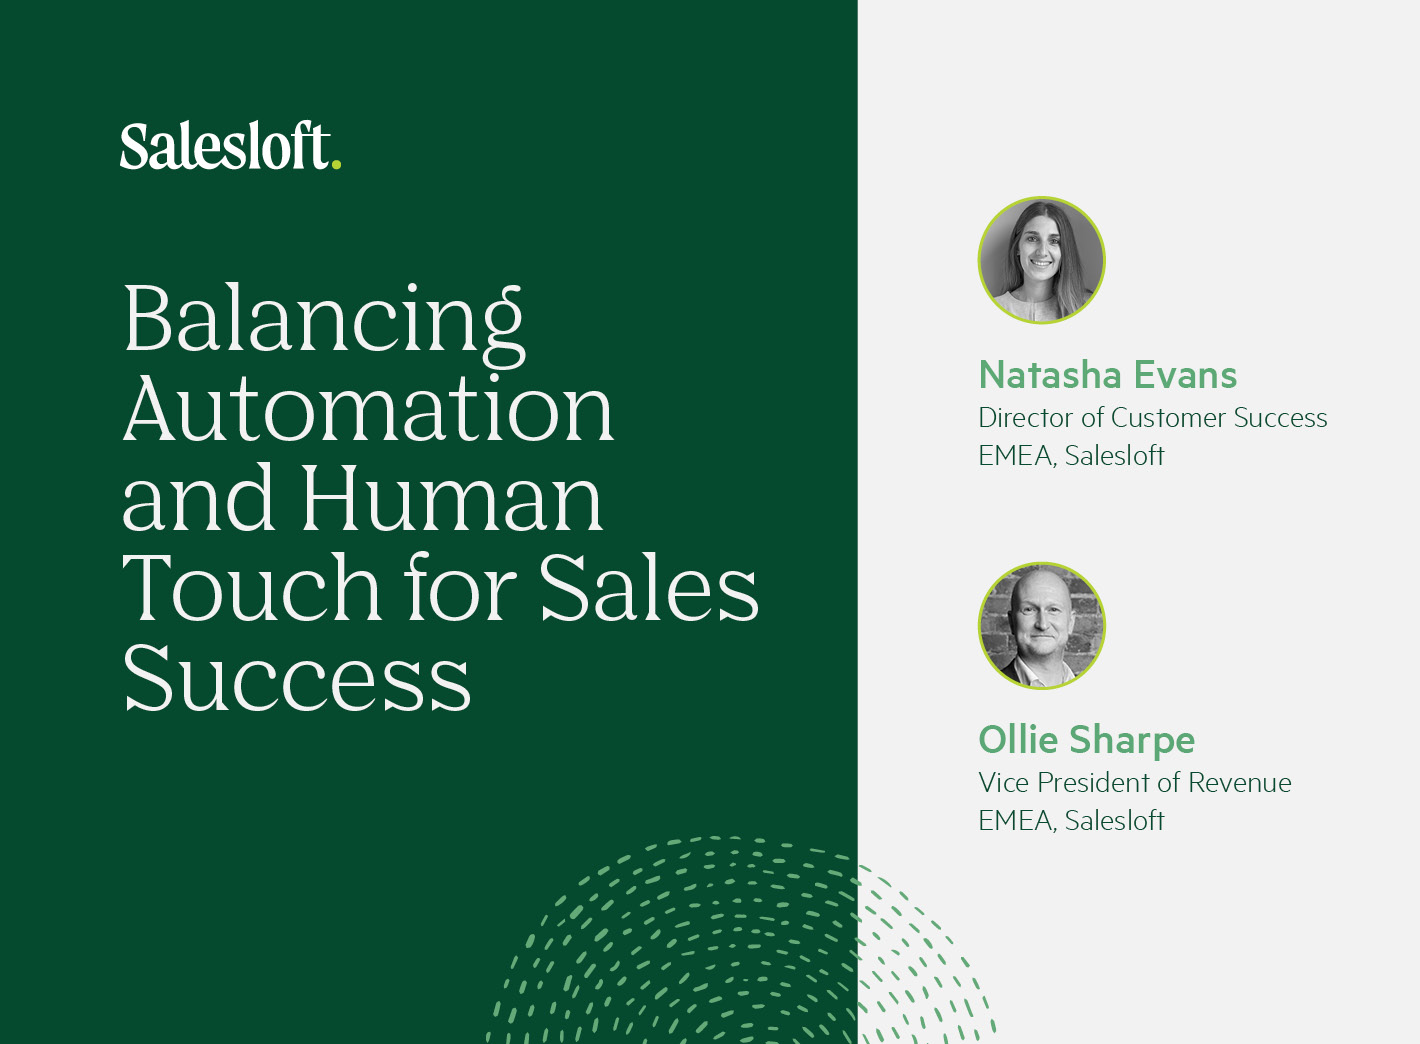 Balancing Automation and Human Touch for Sales Success